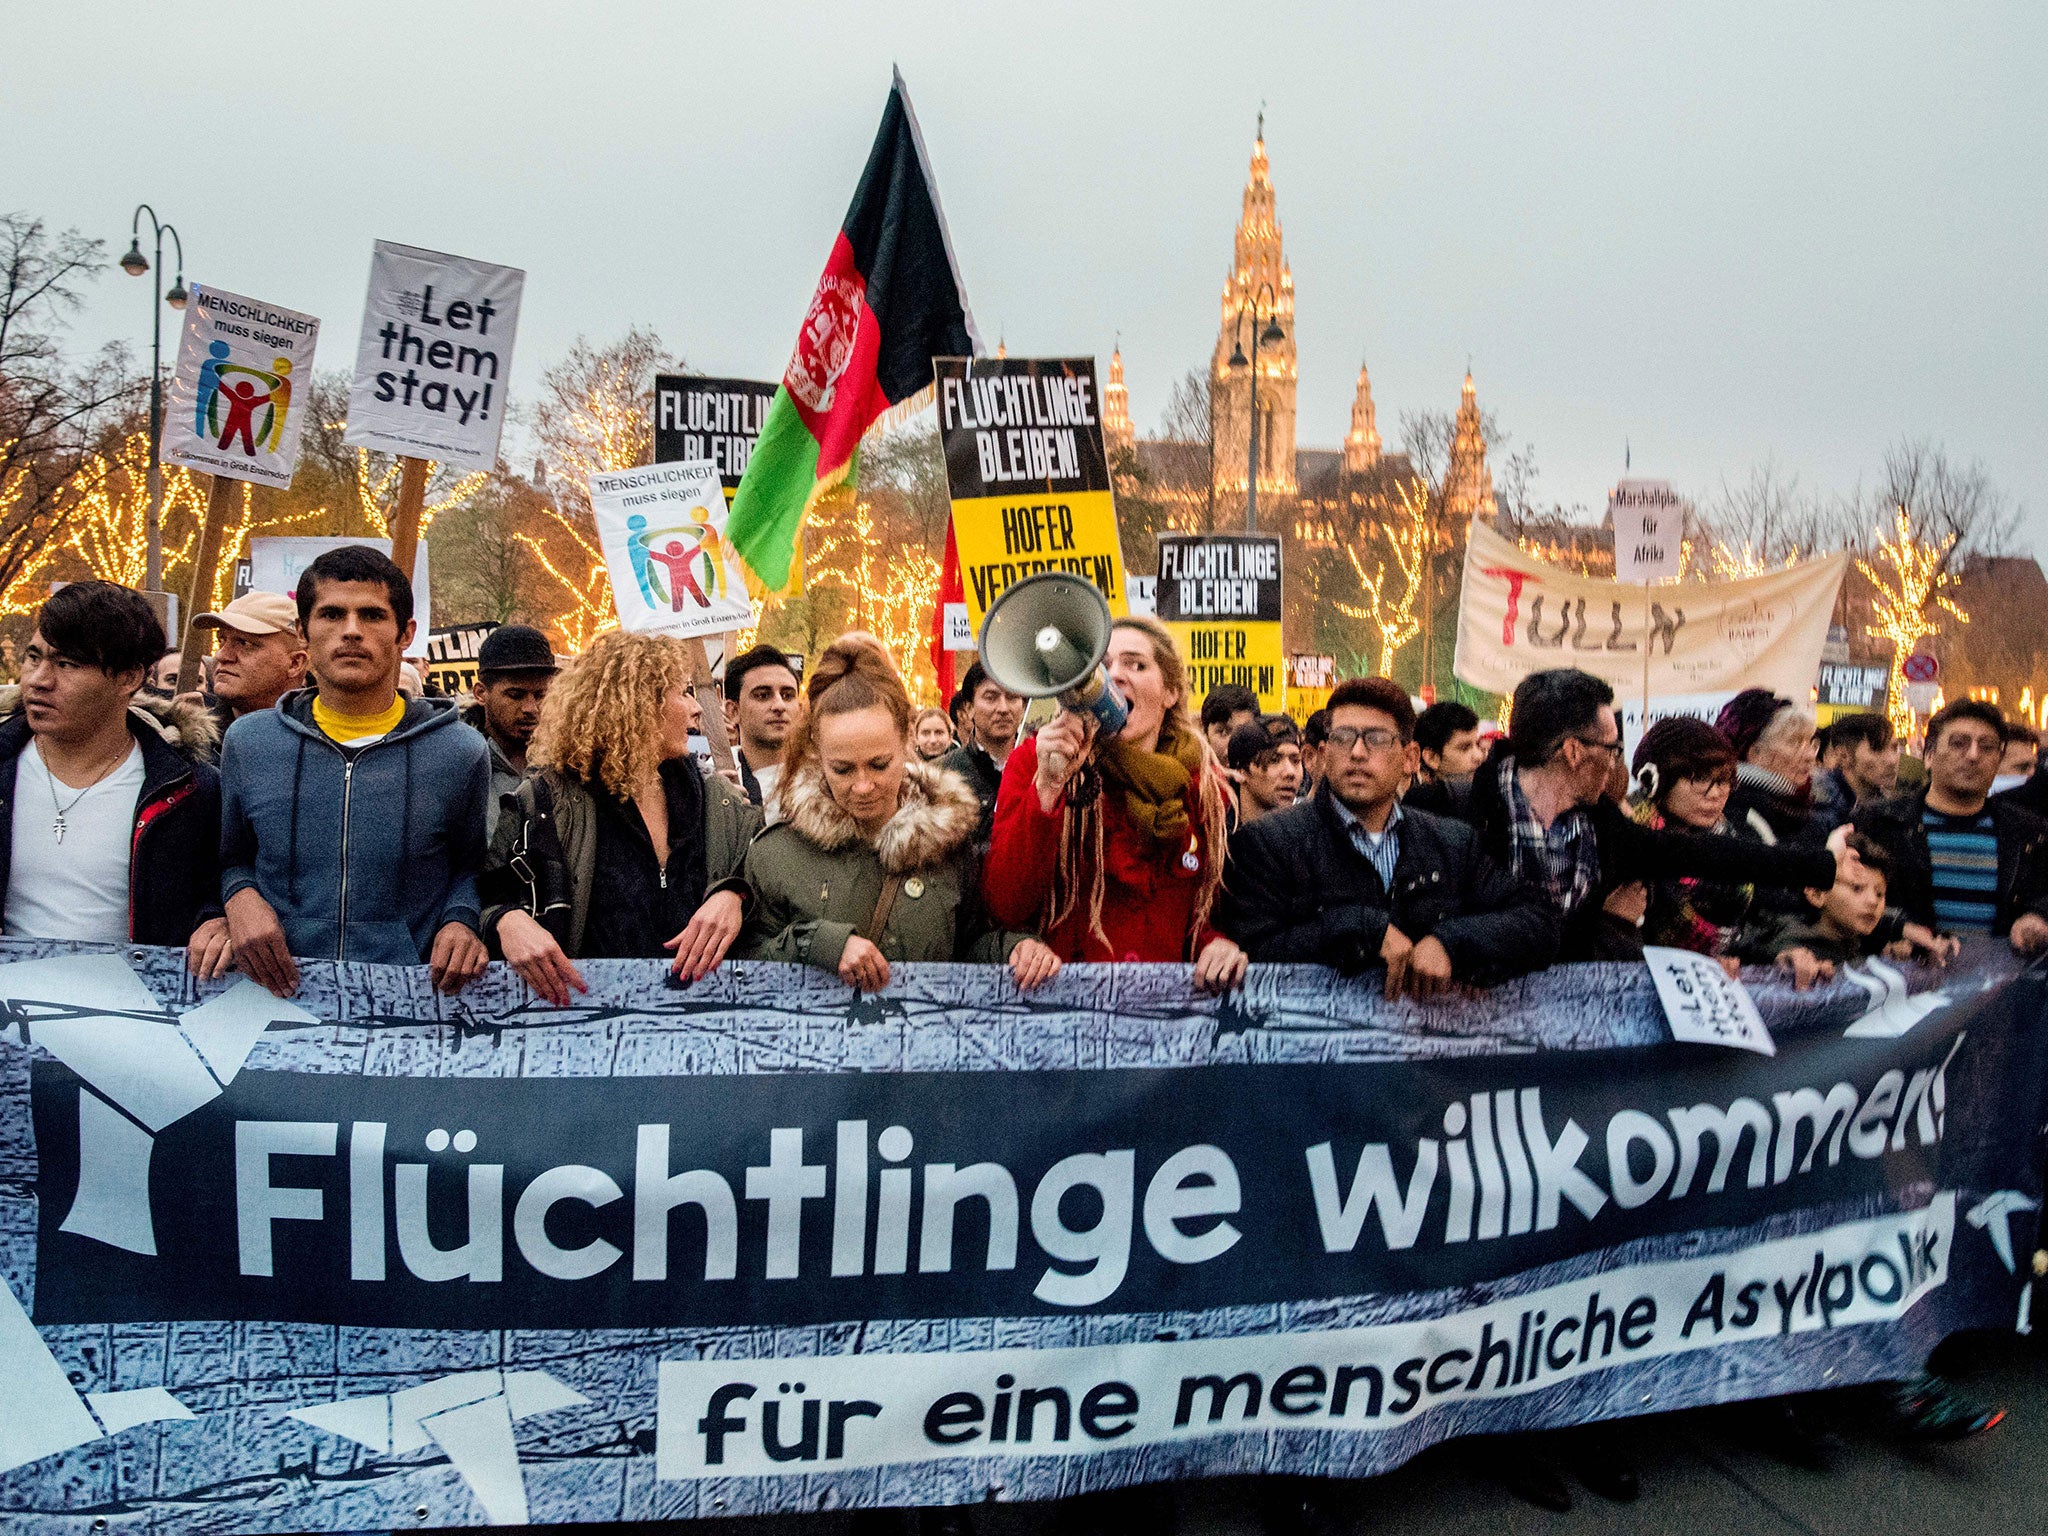 Austrian citizens and asylum seekers march during a pro-refugee protest called 'Let them stay' in Vienna, Austria on November 26, 2016.